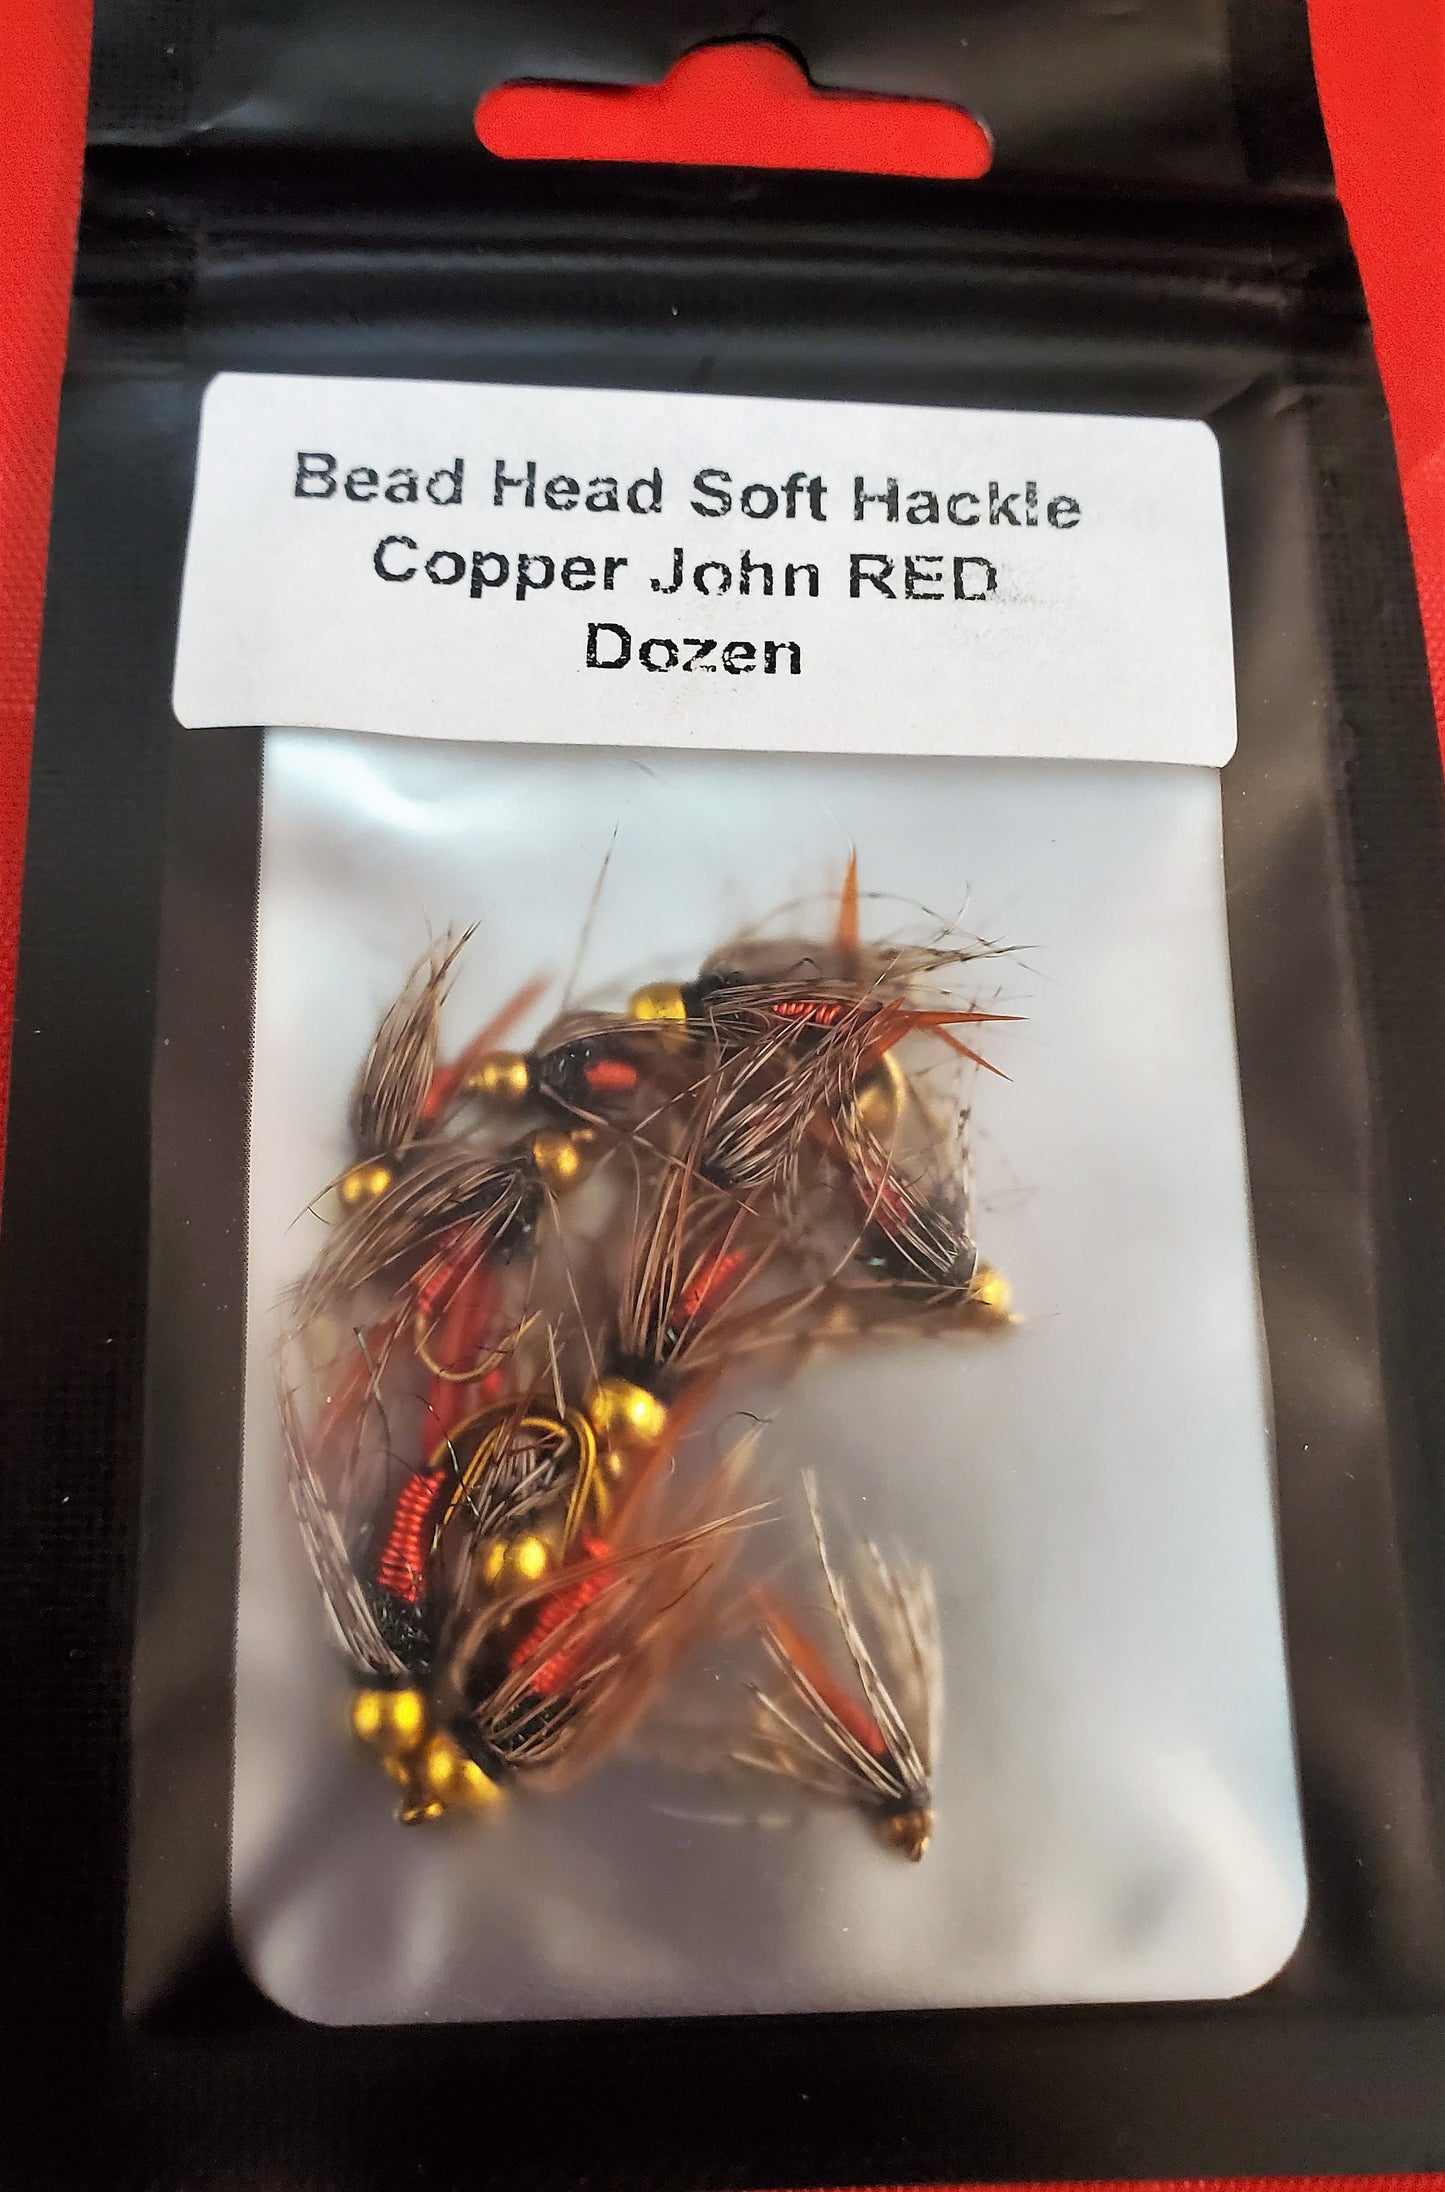 12 Copper John Soft Hackle Selection, Red Copper Soft Hackle John Selection, Mixed Dozen Copper John